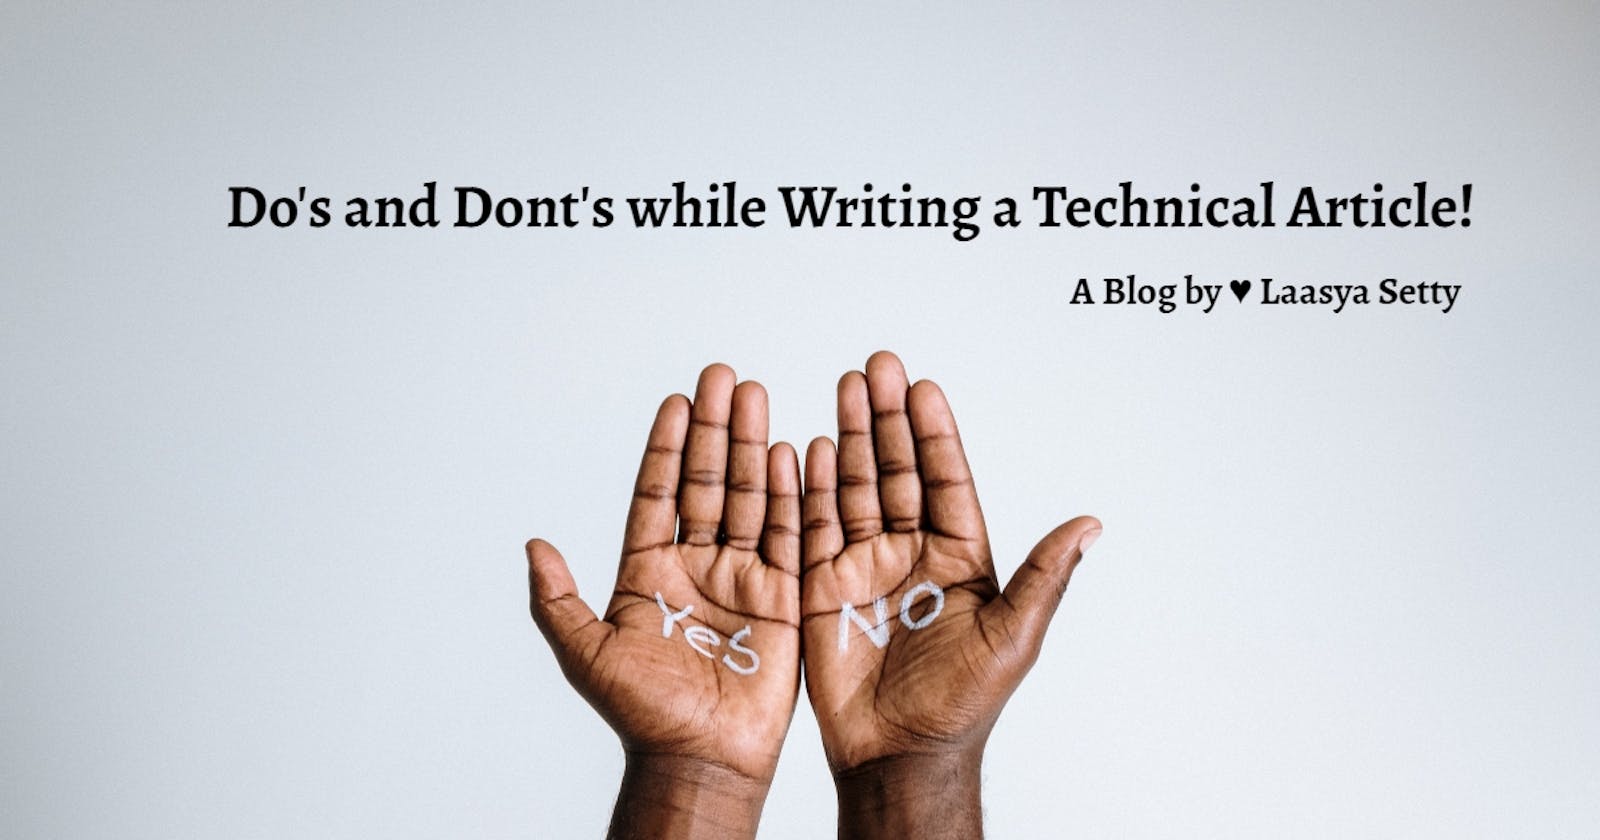 Do's and Don'ts while Writing a Technical Article!